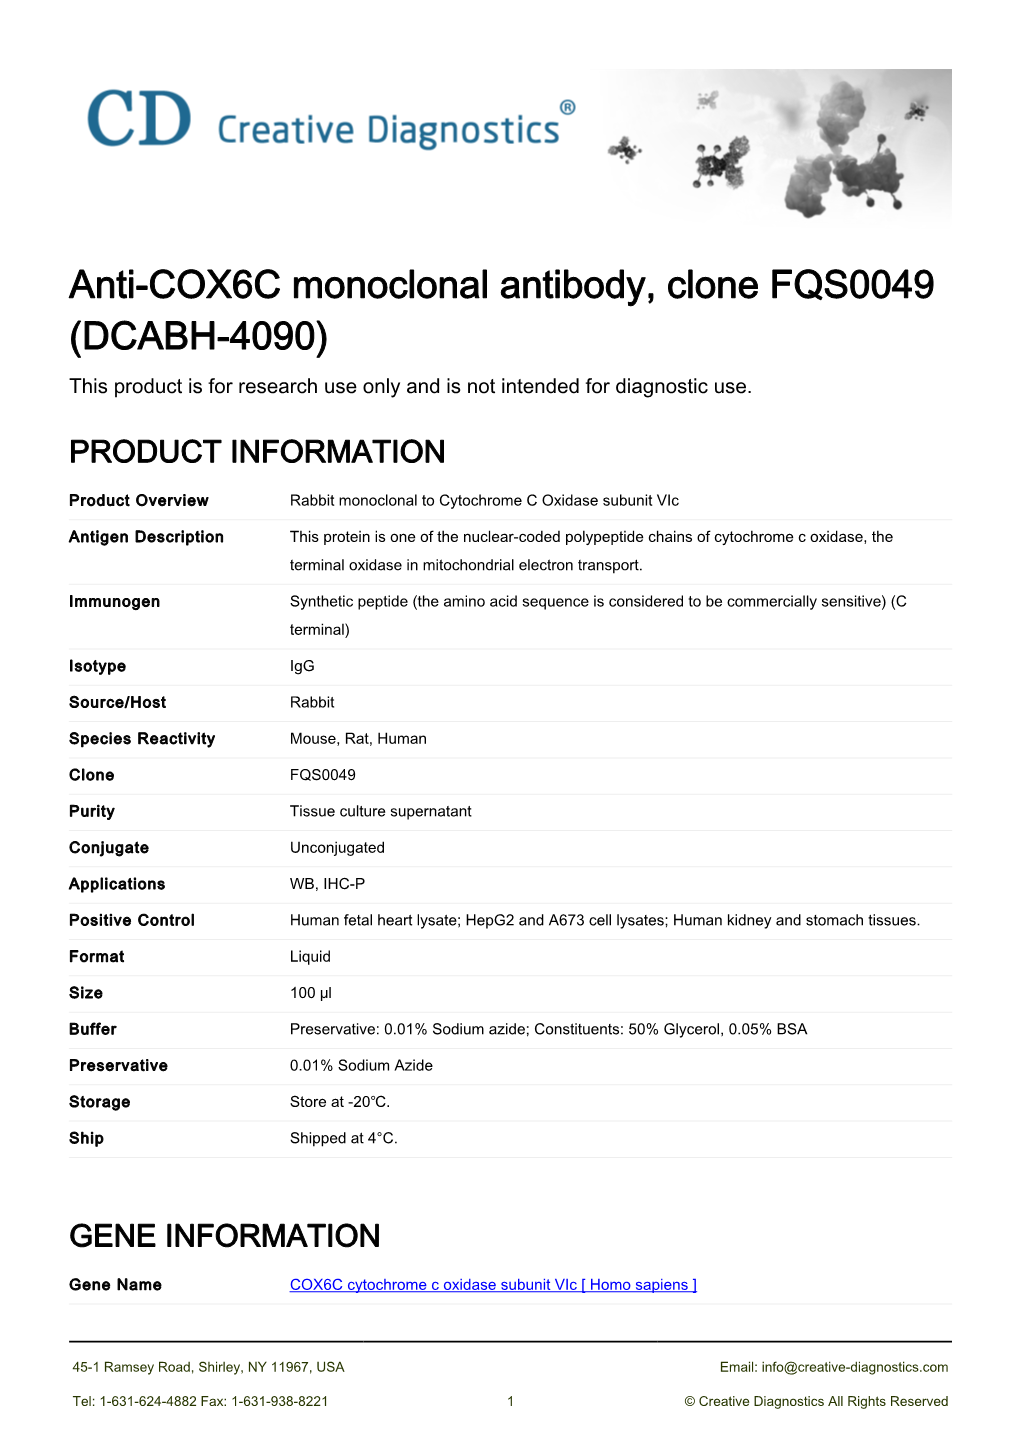 Anti-COX6C Monoclonal Antibody, Clone FQS0049 (DCABH-4090) This Product Is for Research Use Only and Is Not Intended for Diagnostic Use